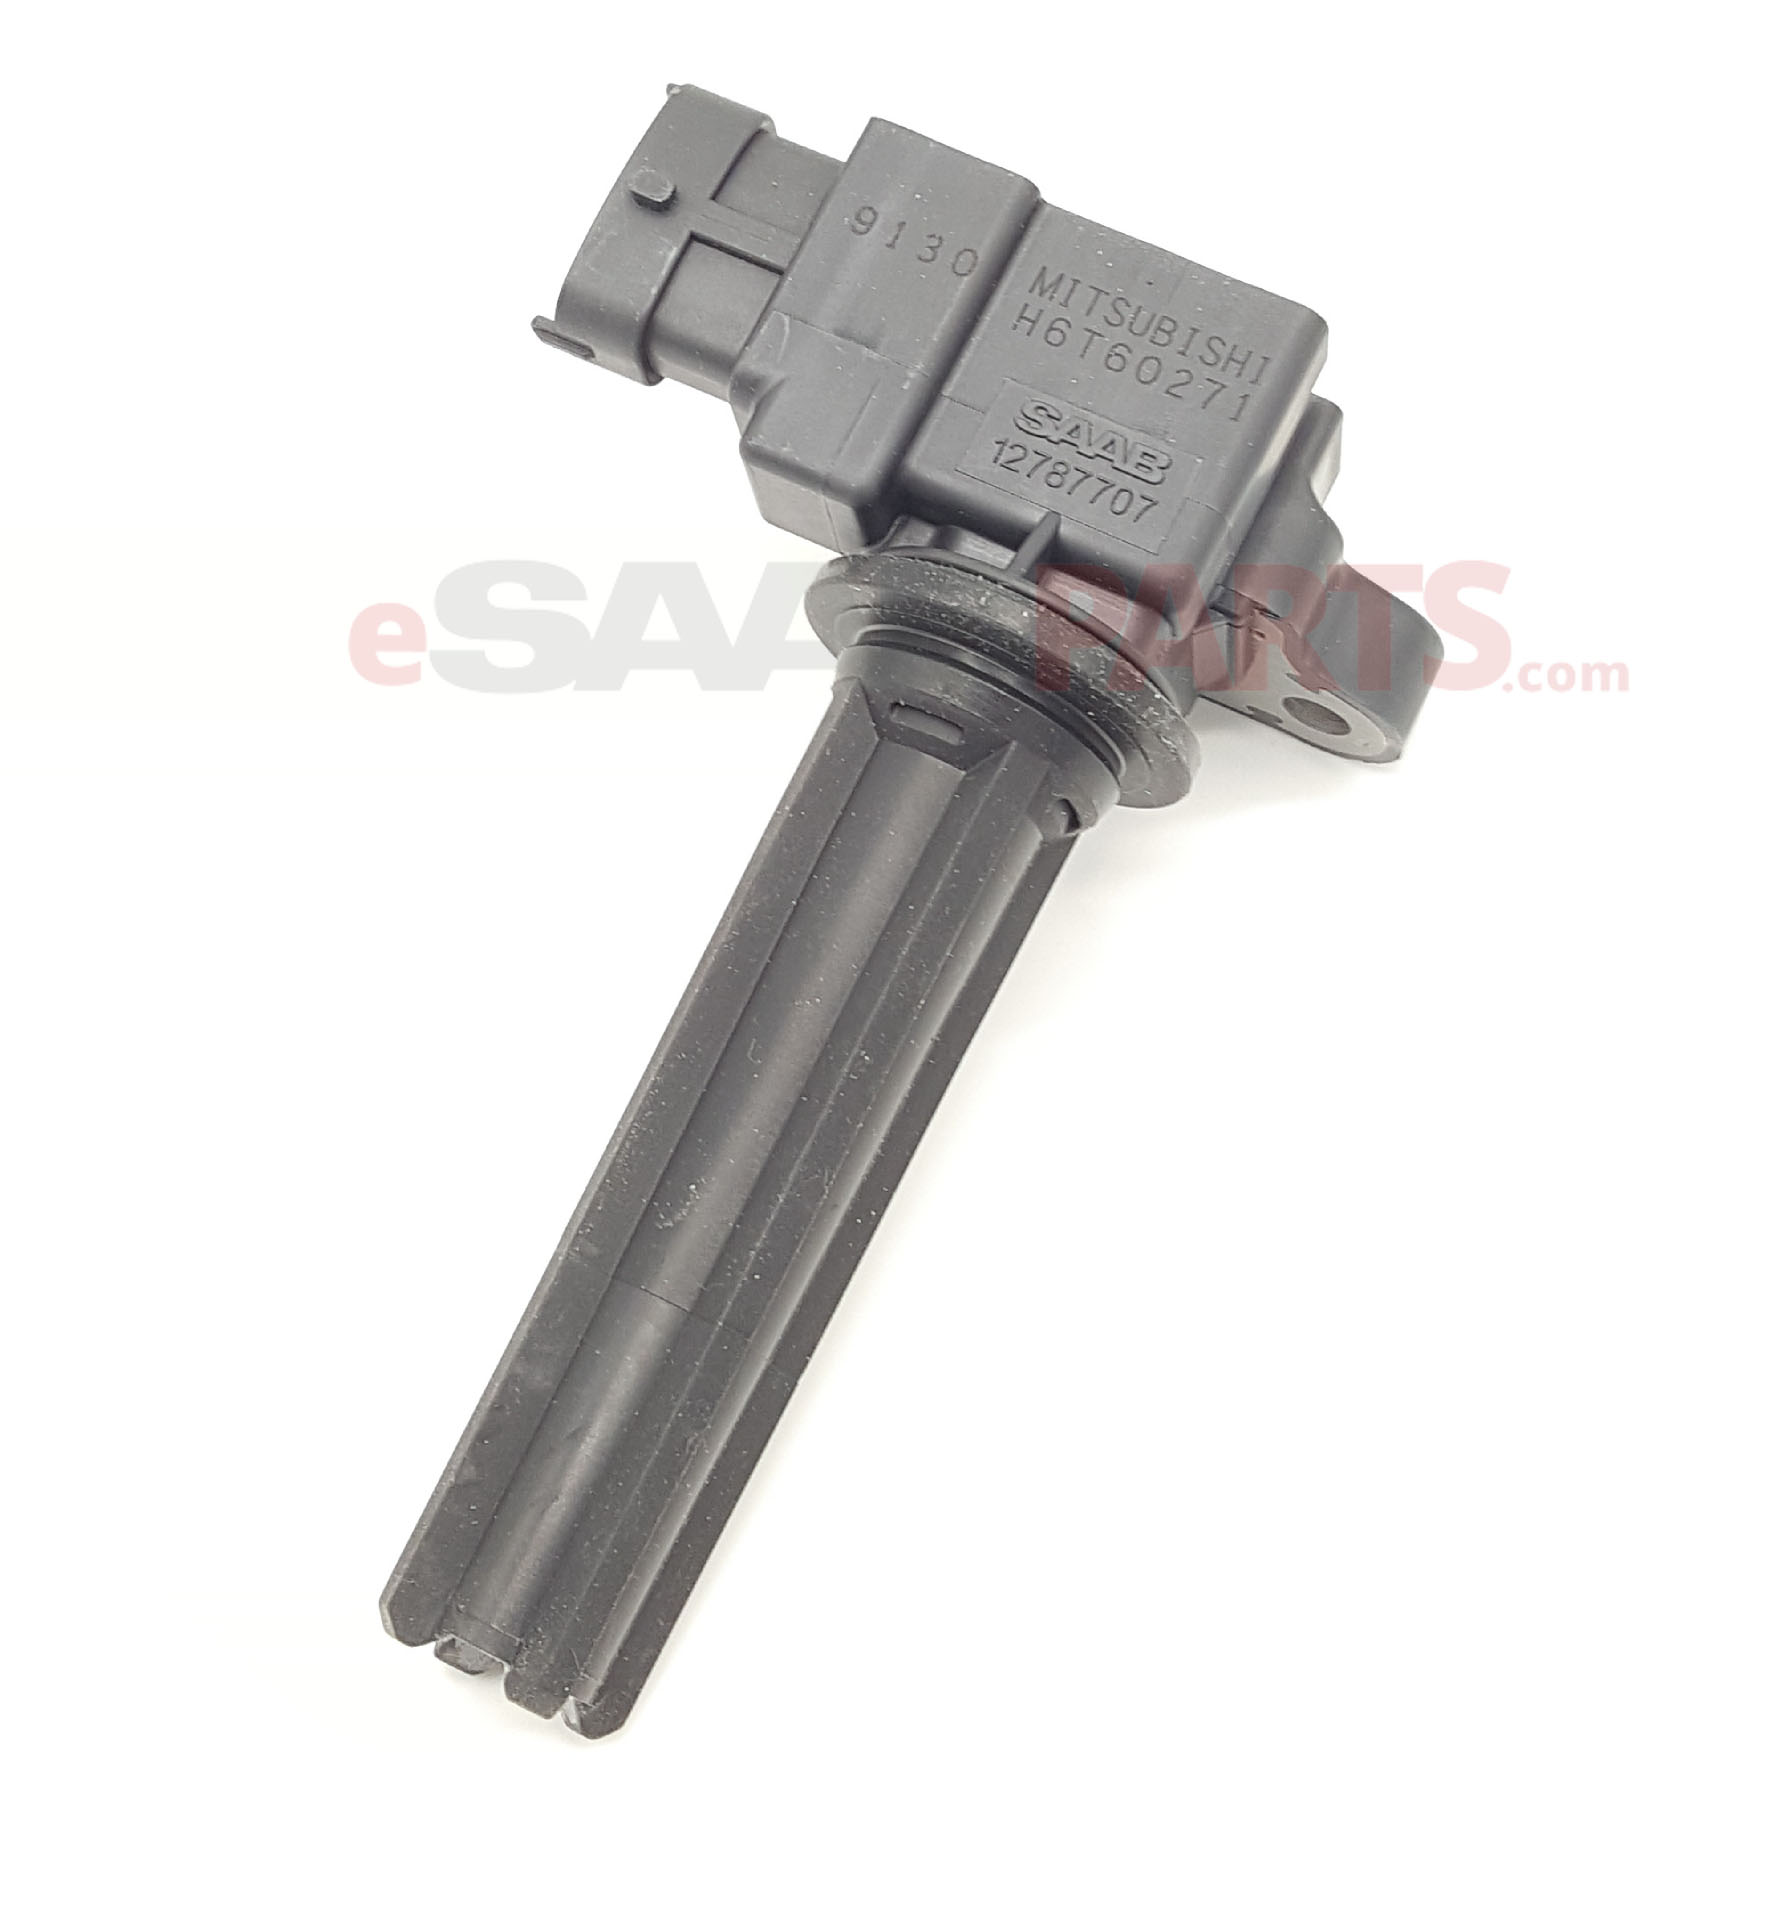 Details about  / For 2003-2011 Saab 93 Ignition Coil Connector Kit SMP 51967XX 2004 2006 2005